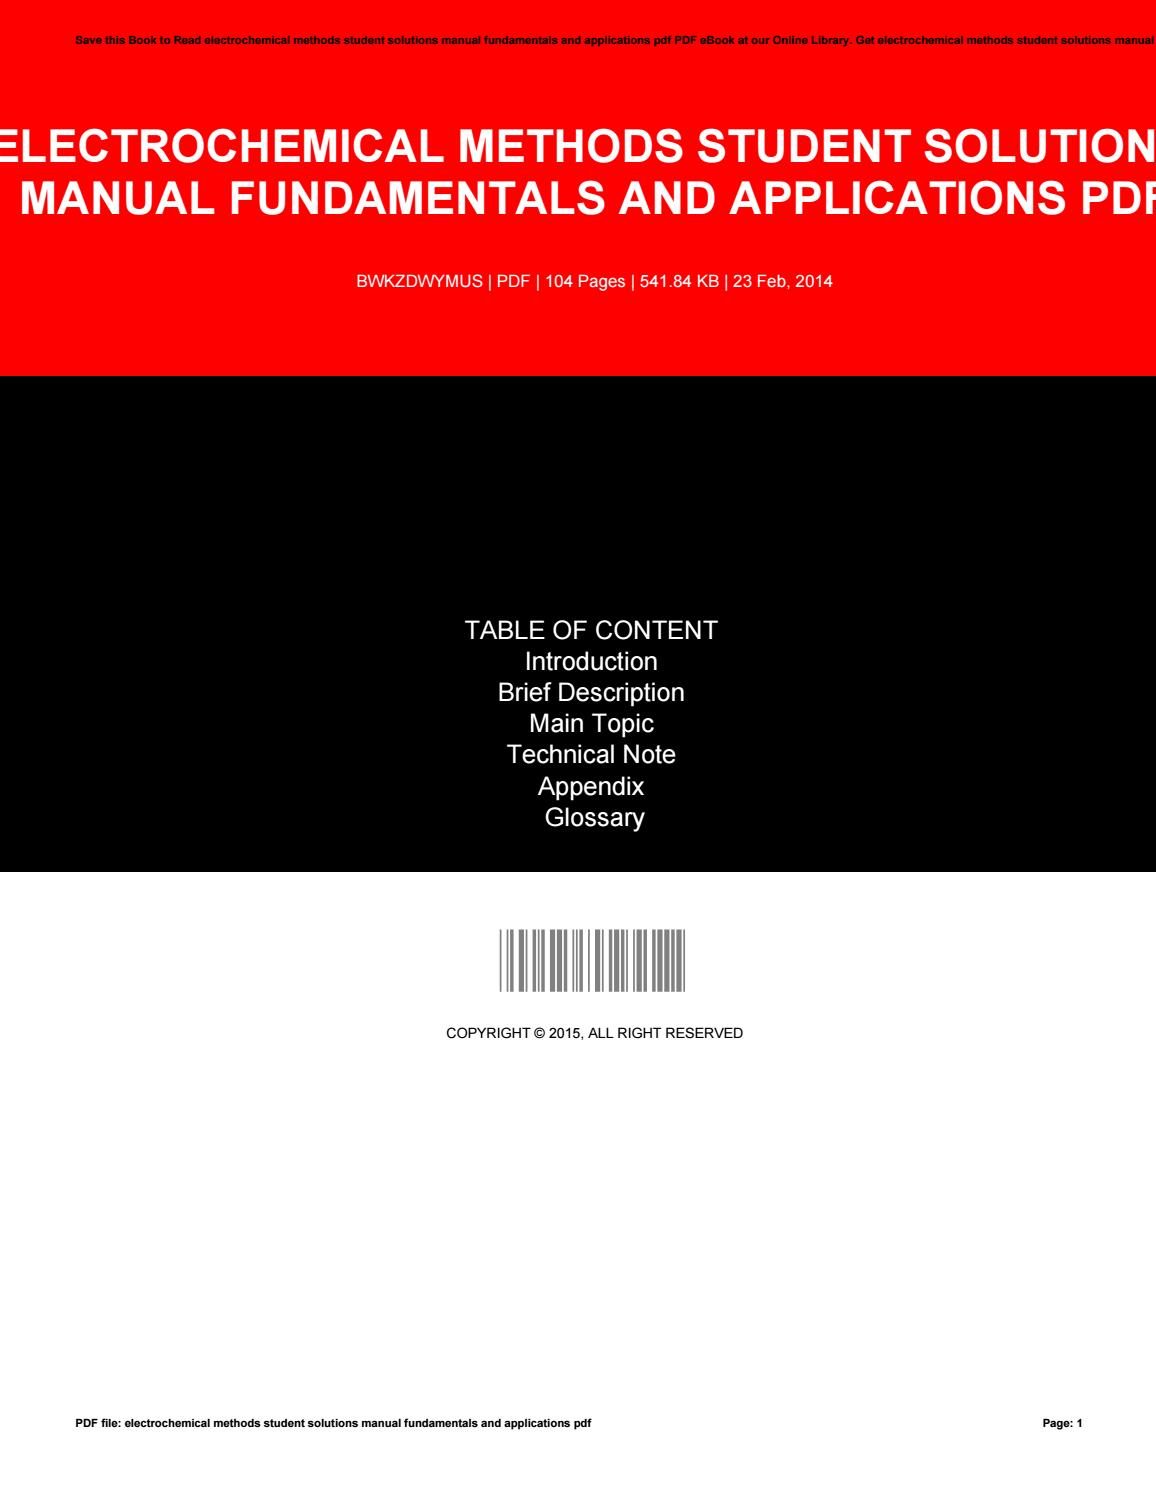 Electrochemical methods fundamentals and applications solutions manual